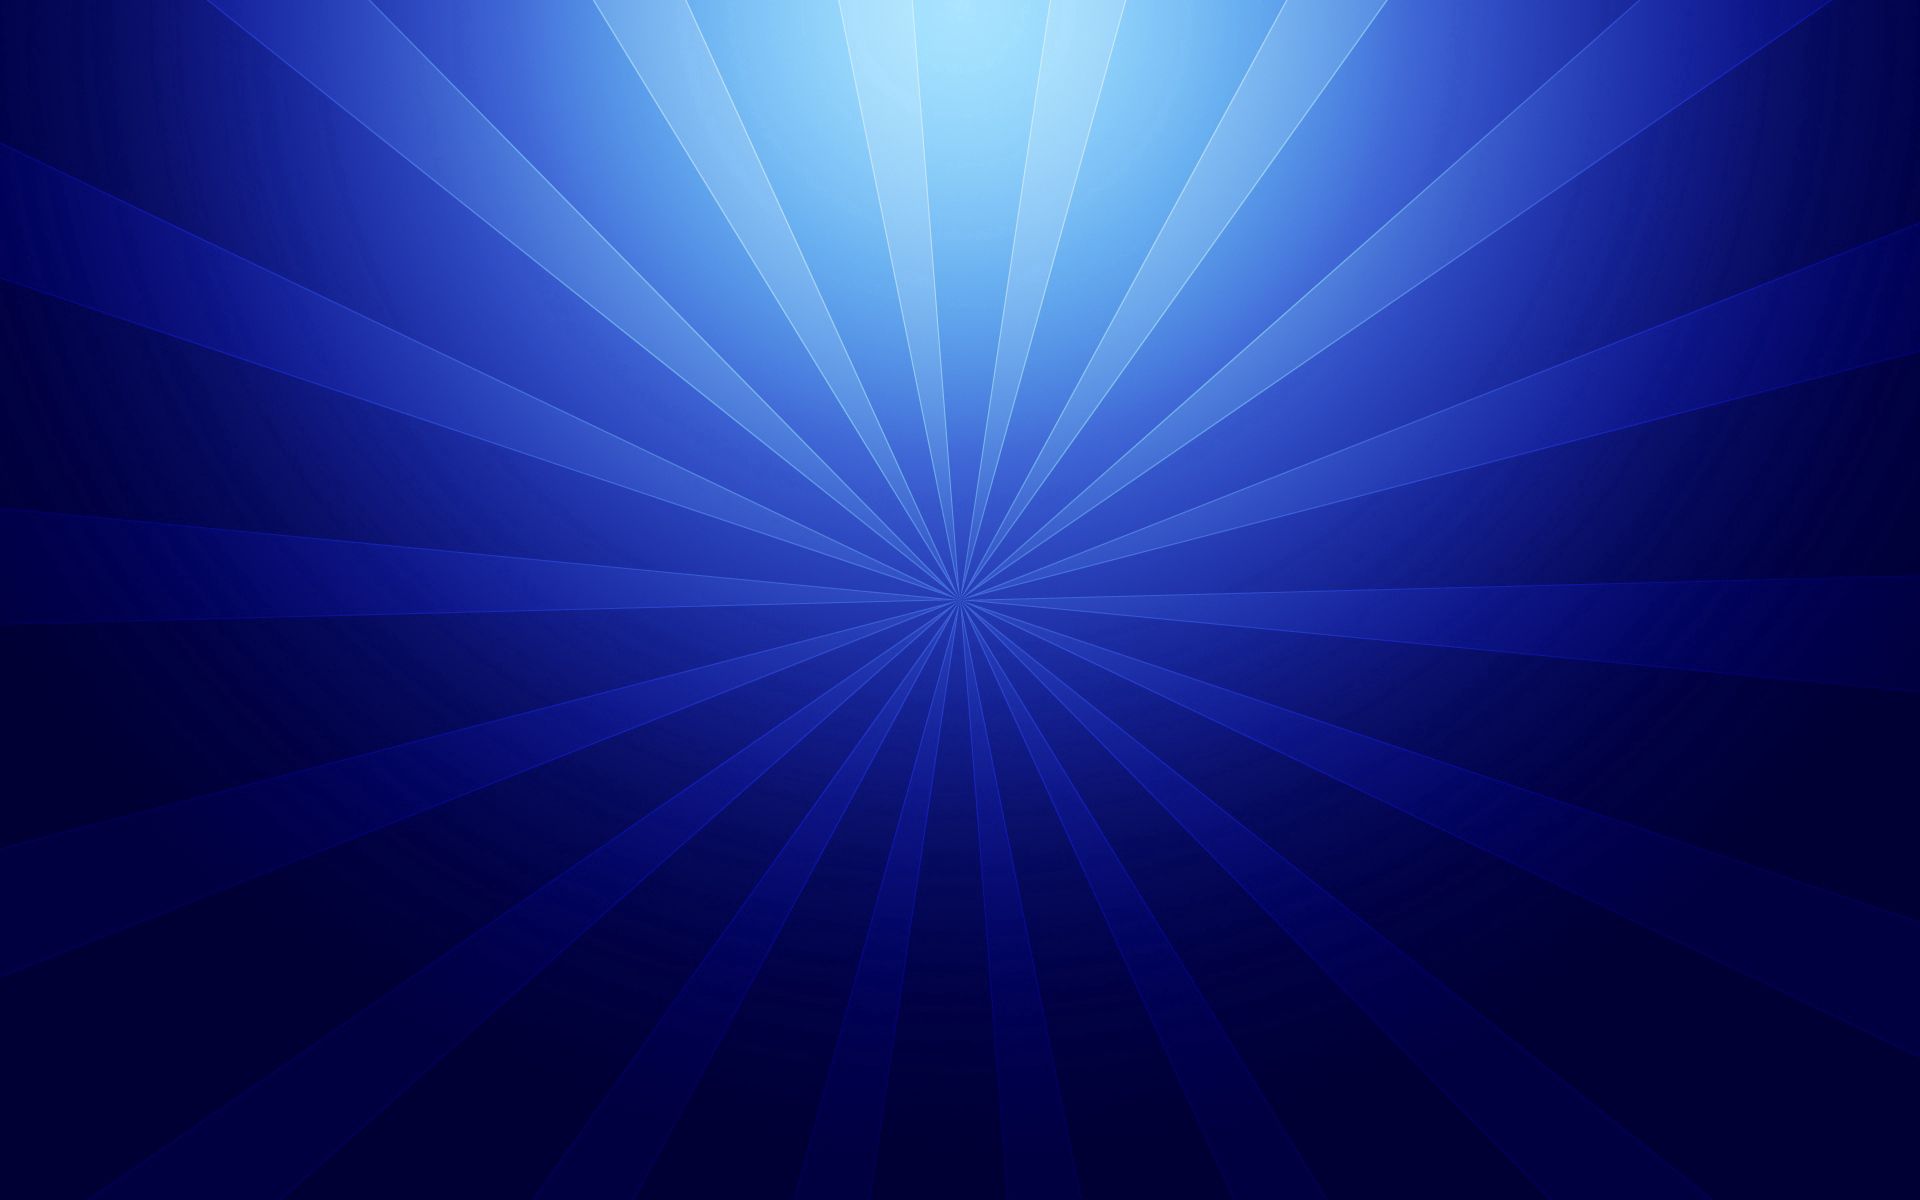 Download wallpaper 1920x1200 abstract, blue, rays, line, creative, background  hd background